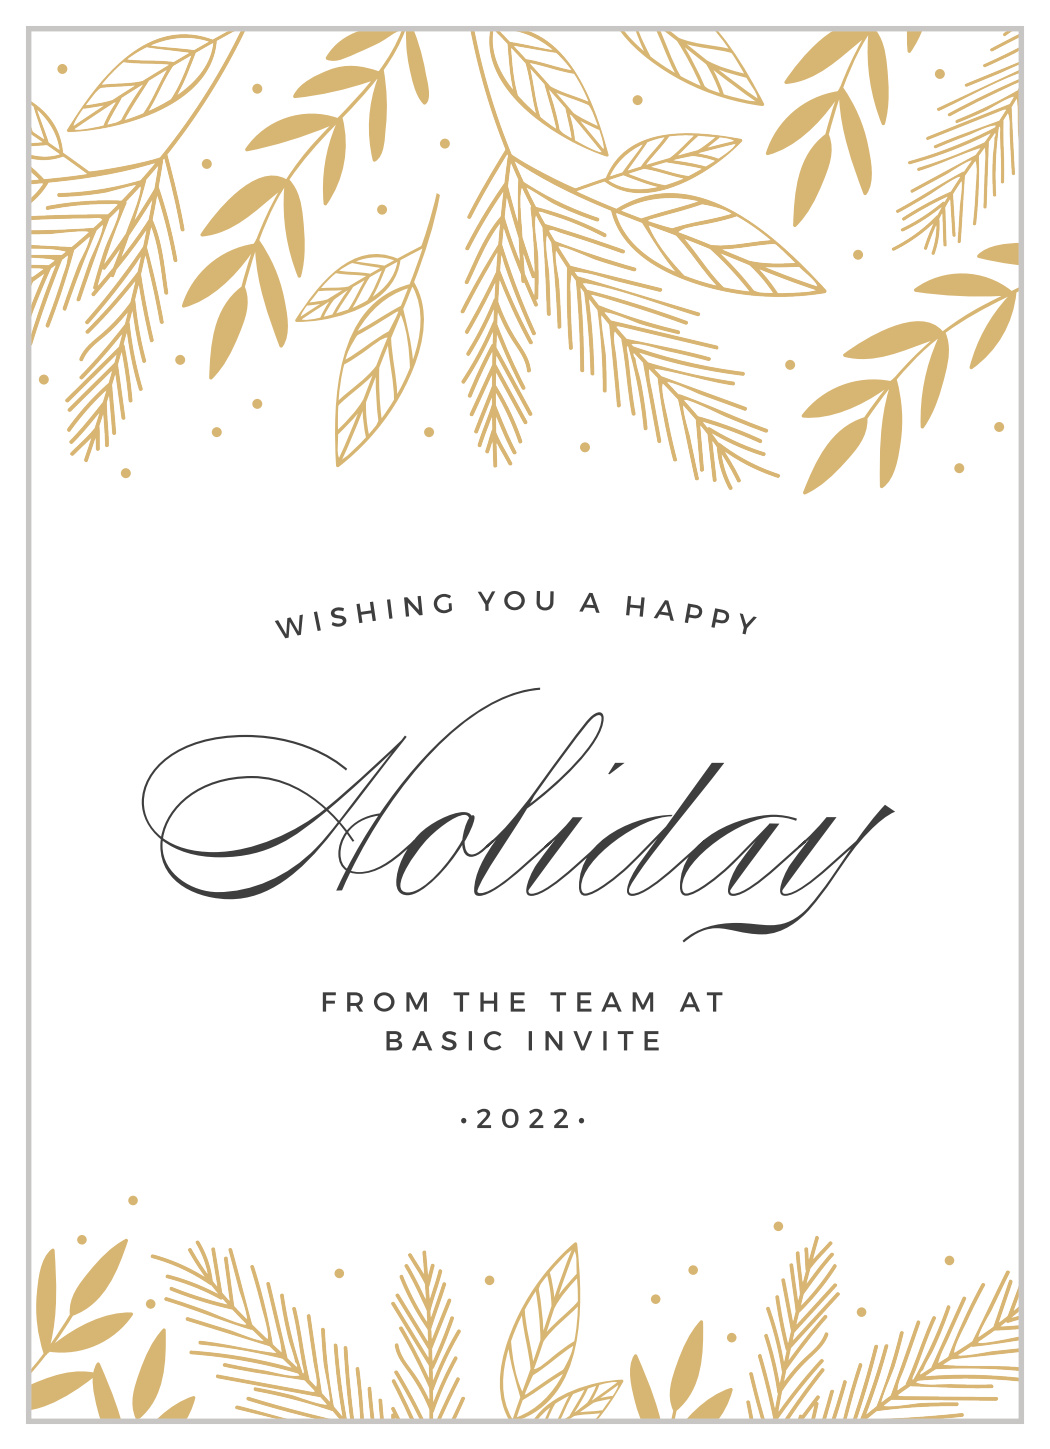 Golden Pine Corporate Holiday Cards